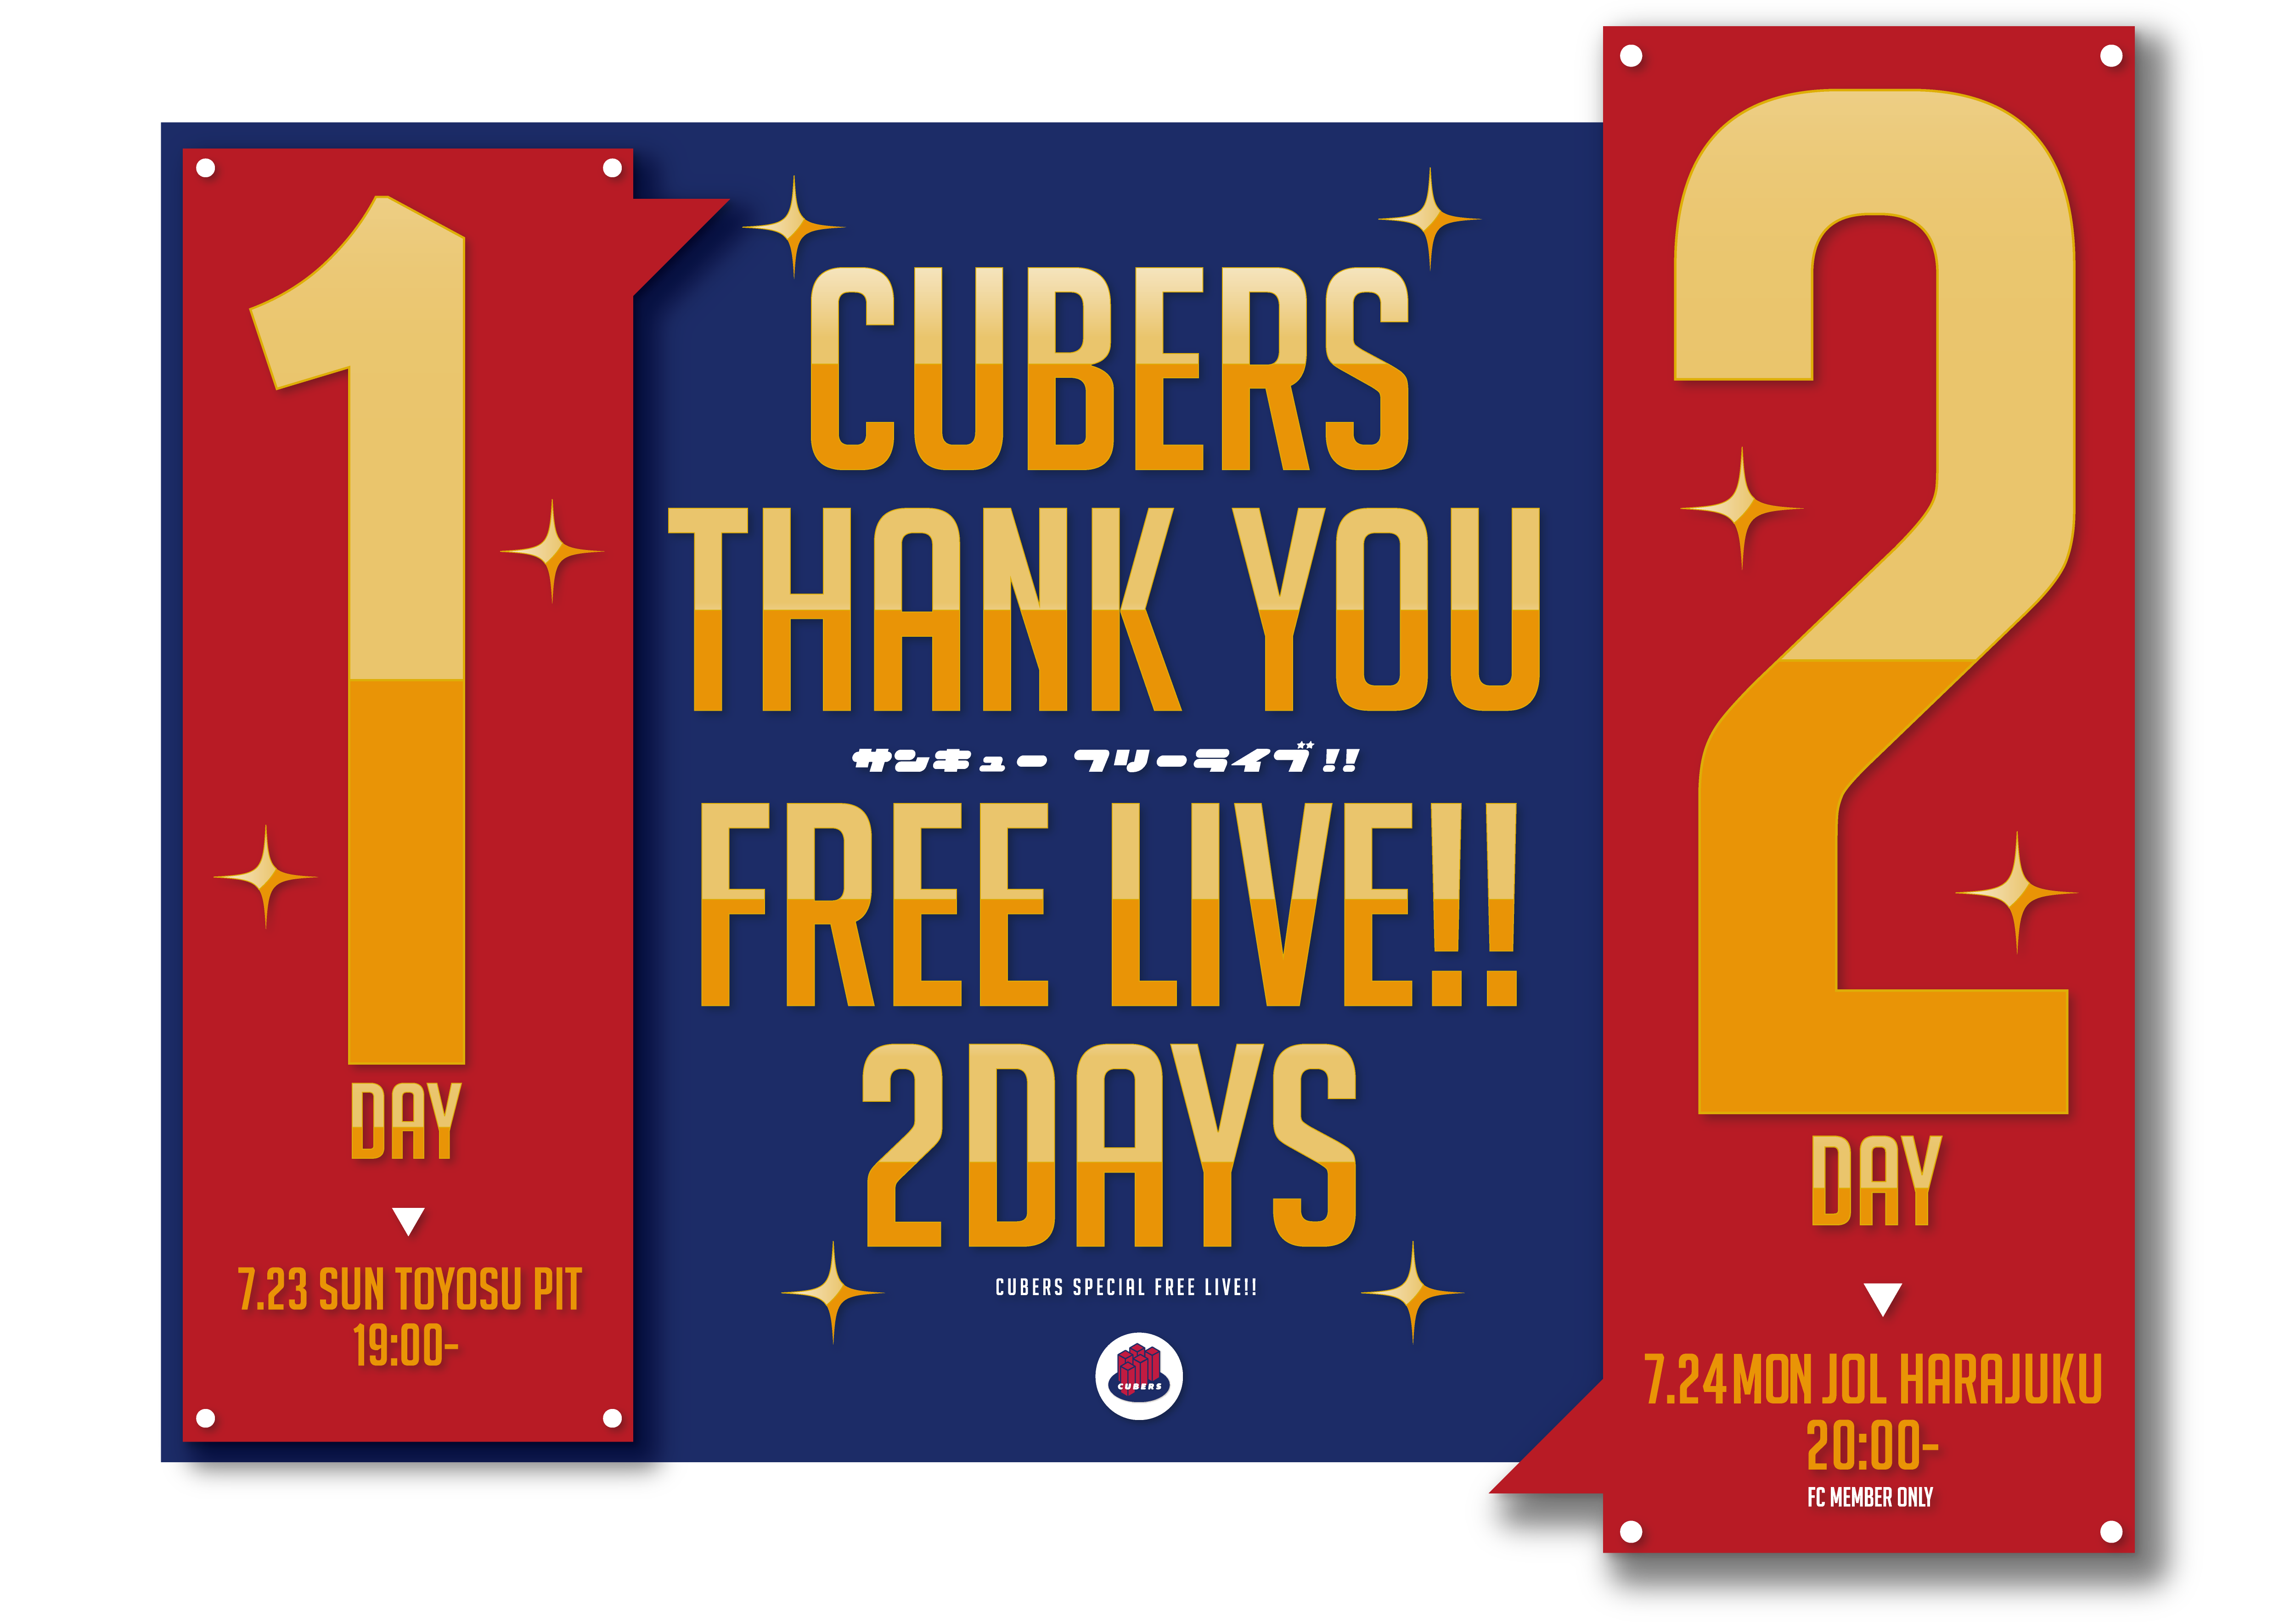 【NEWS】7/24(月)開催「CUBERS Thank youフリーライブ2days -Day2 CUBERS FANCLUB会員限定ライブ- 」物販・特典会情報更新